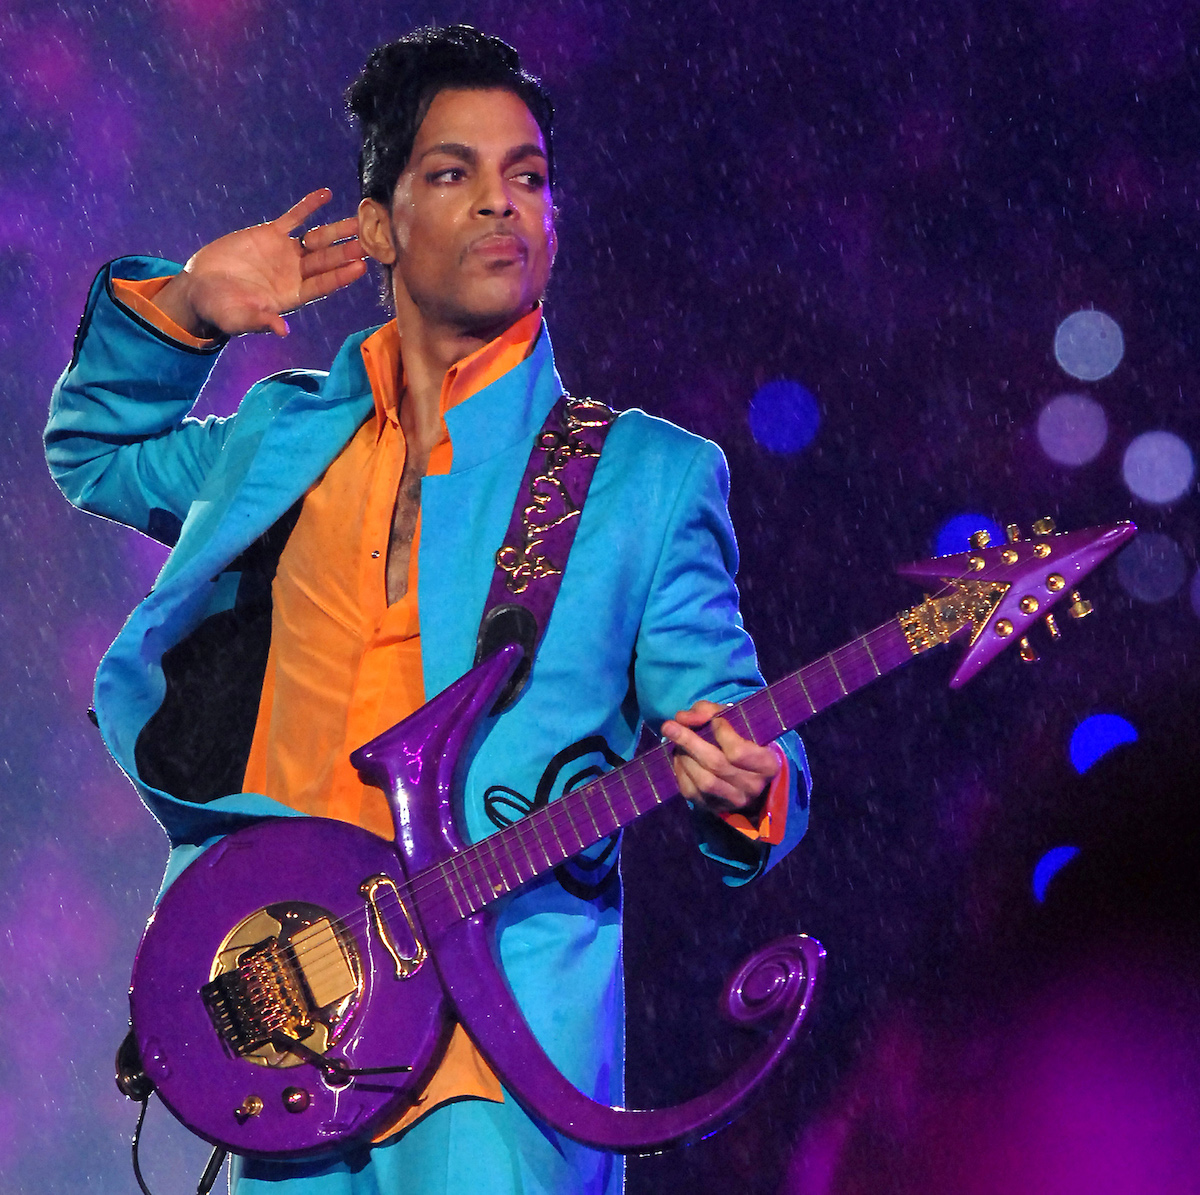 Prince performs at the Super Bowl with a purple guitar.